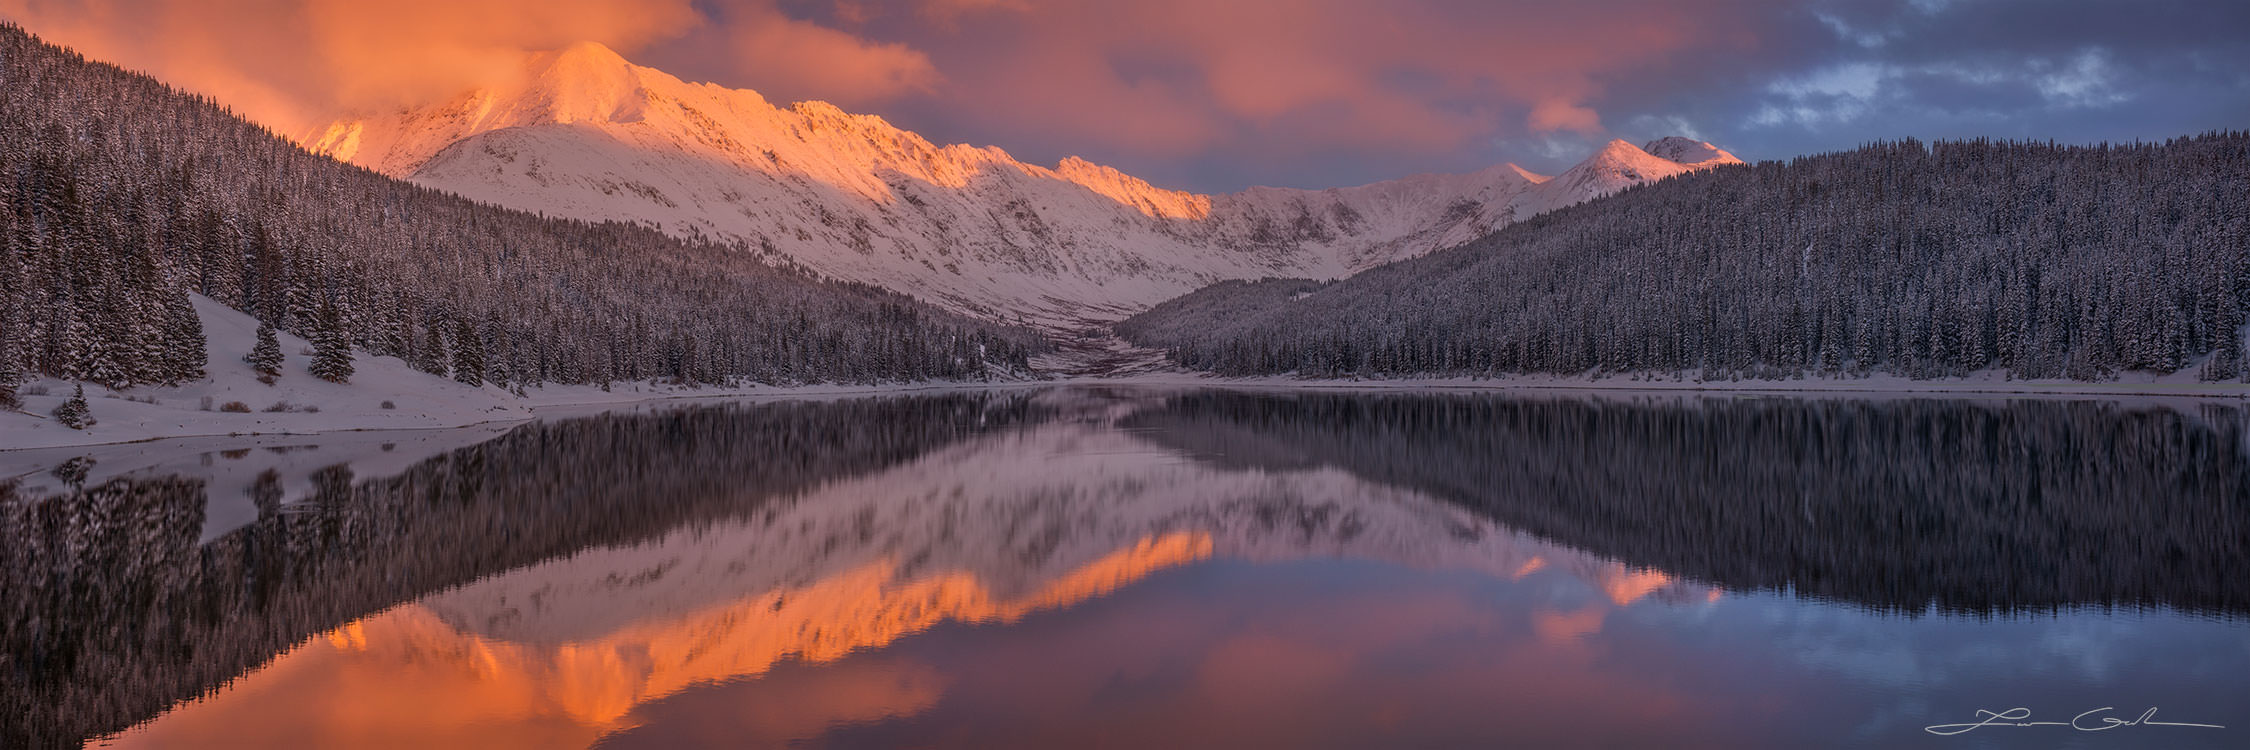 A calm lake reflecting snow covered trees and mountains in orange sunset light and clouds